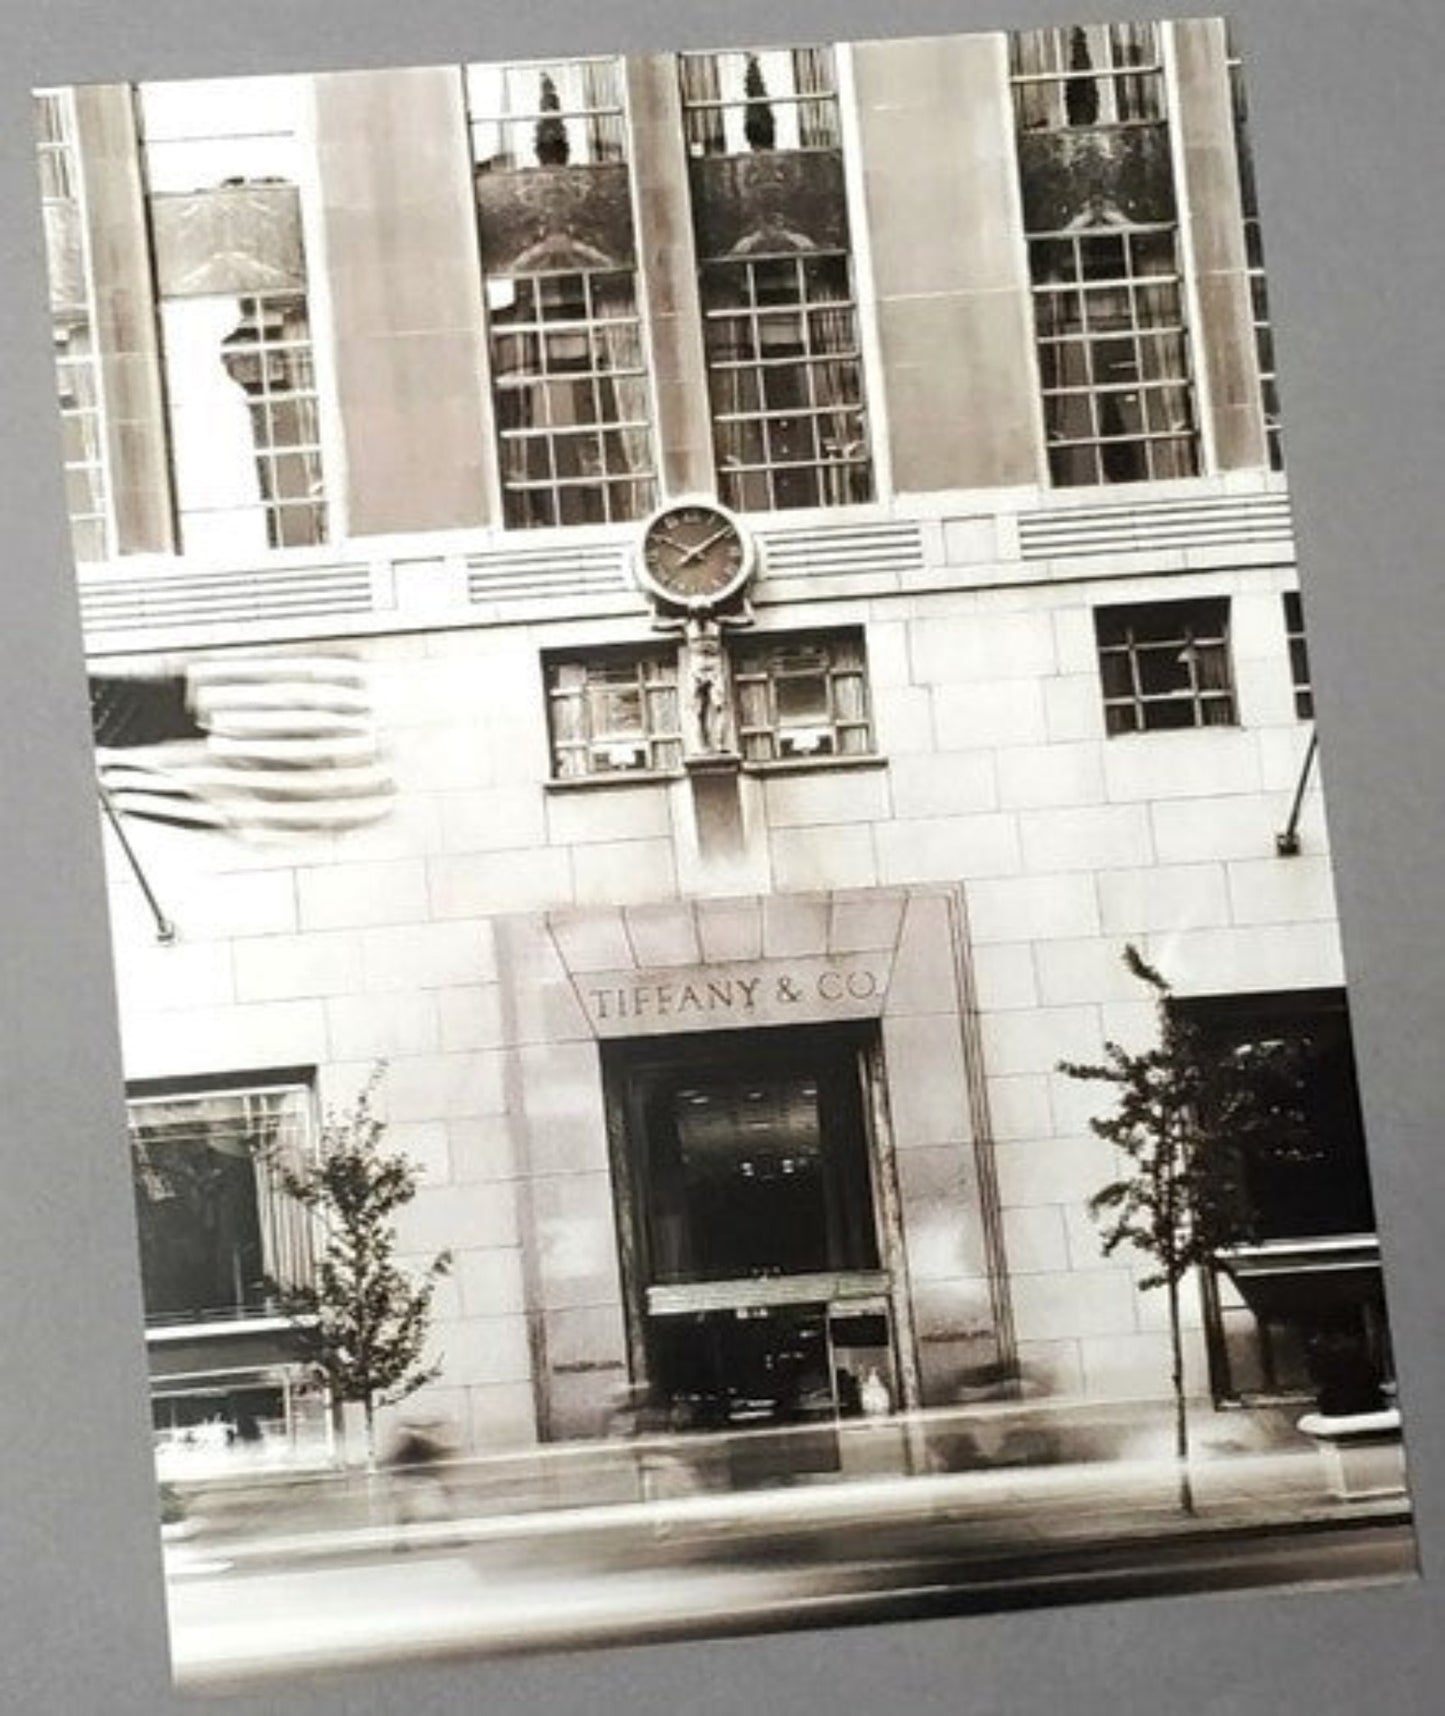 Tiffany & Co. 5th Ave Flagship Store Art Print Available In AREA51GALLERY New Orleans